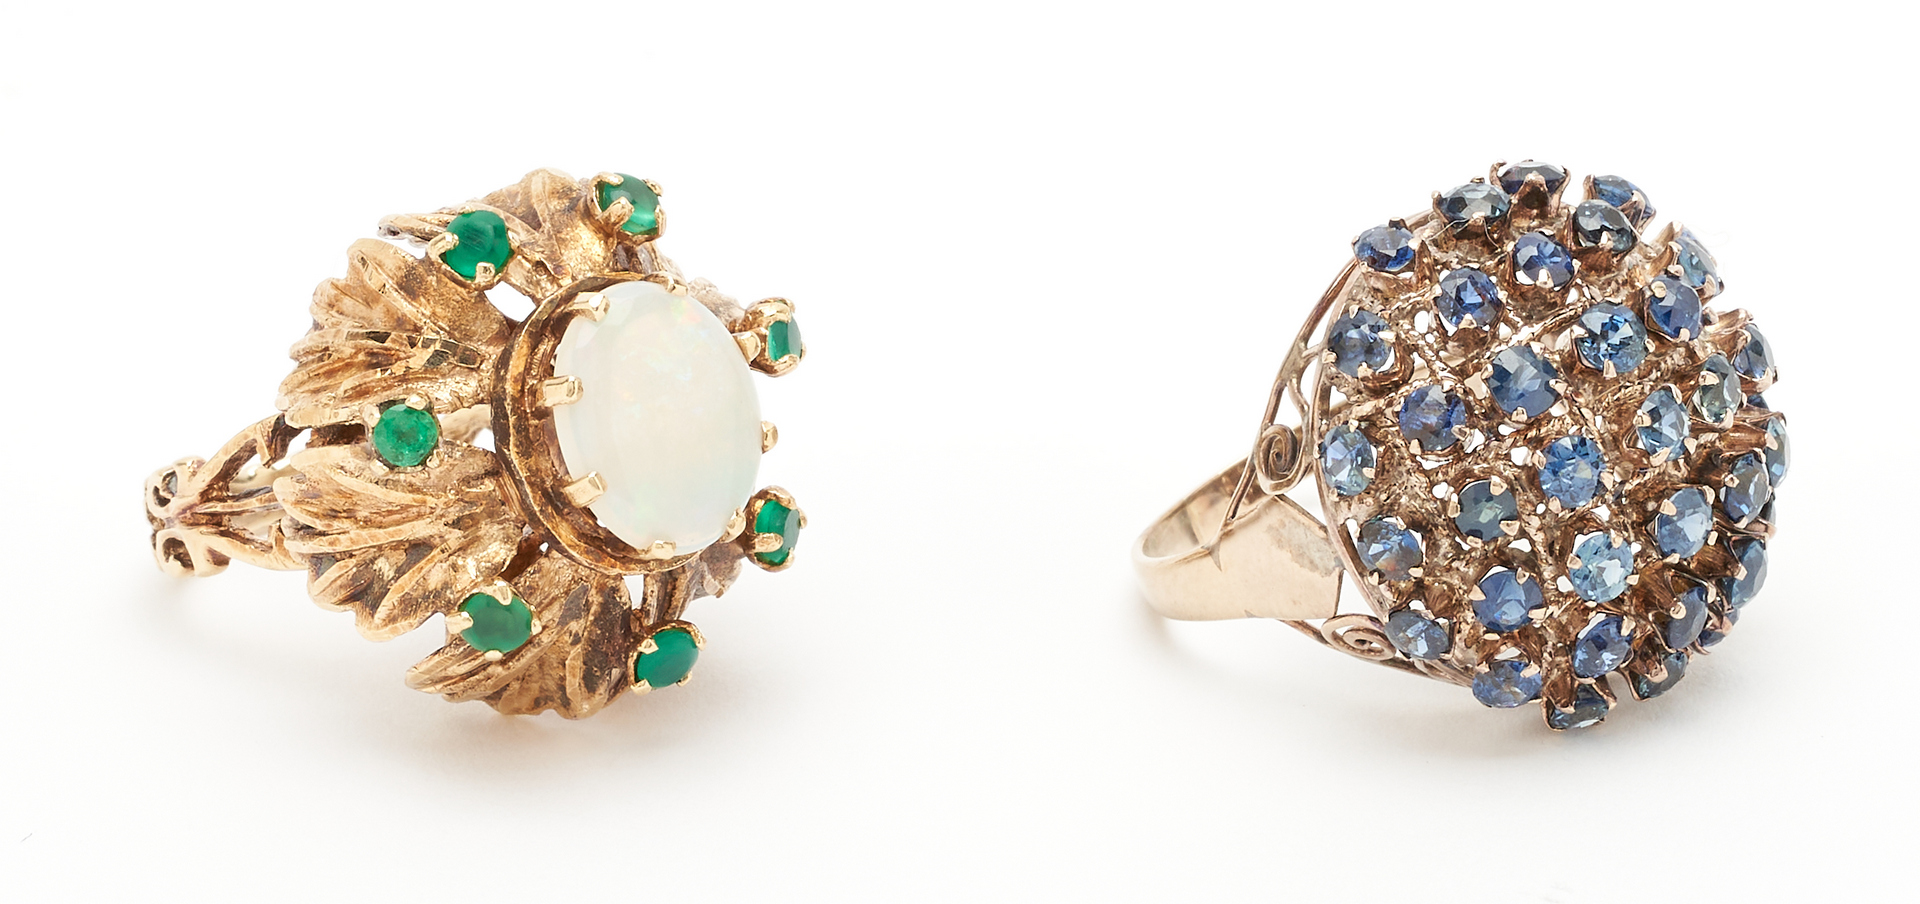 Lot 27: 2 Vintage 14K Gold Ladies Rings with Sapphires, Opal & Green Onyx